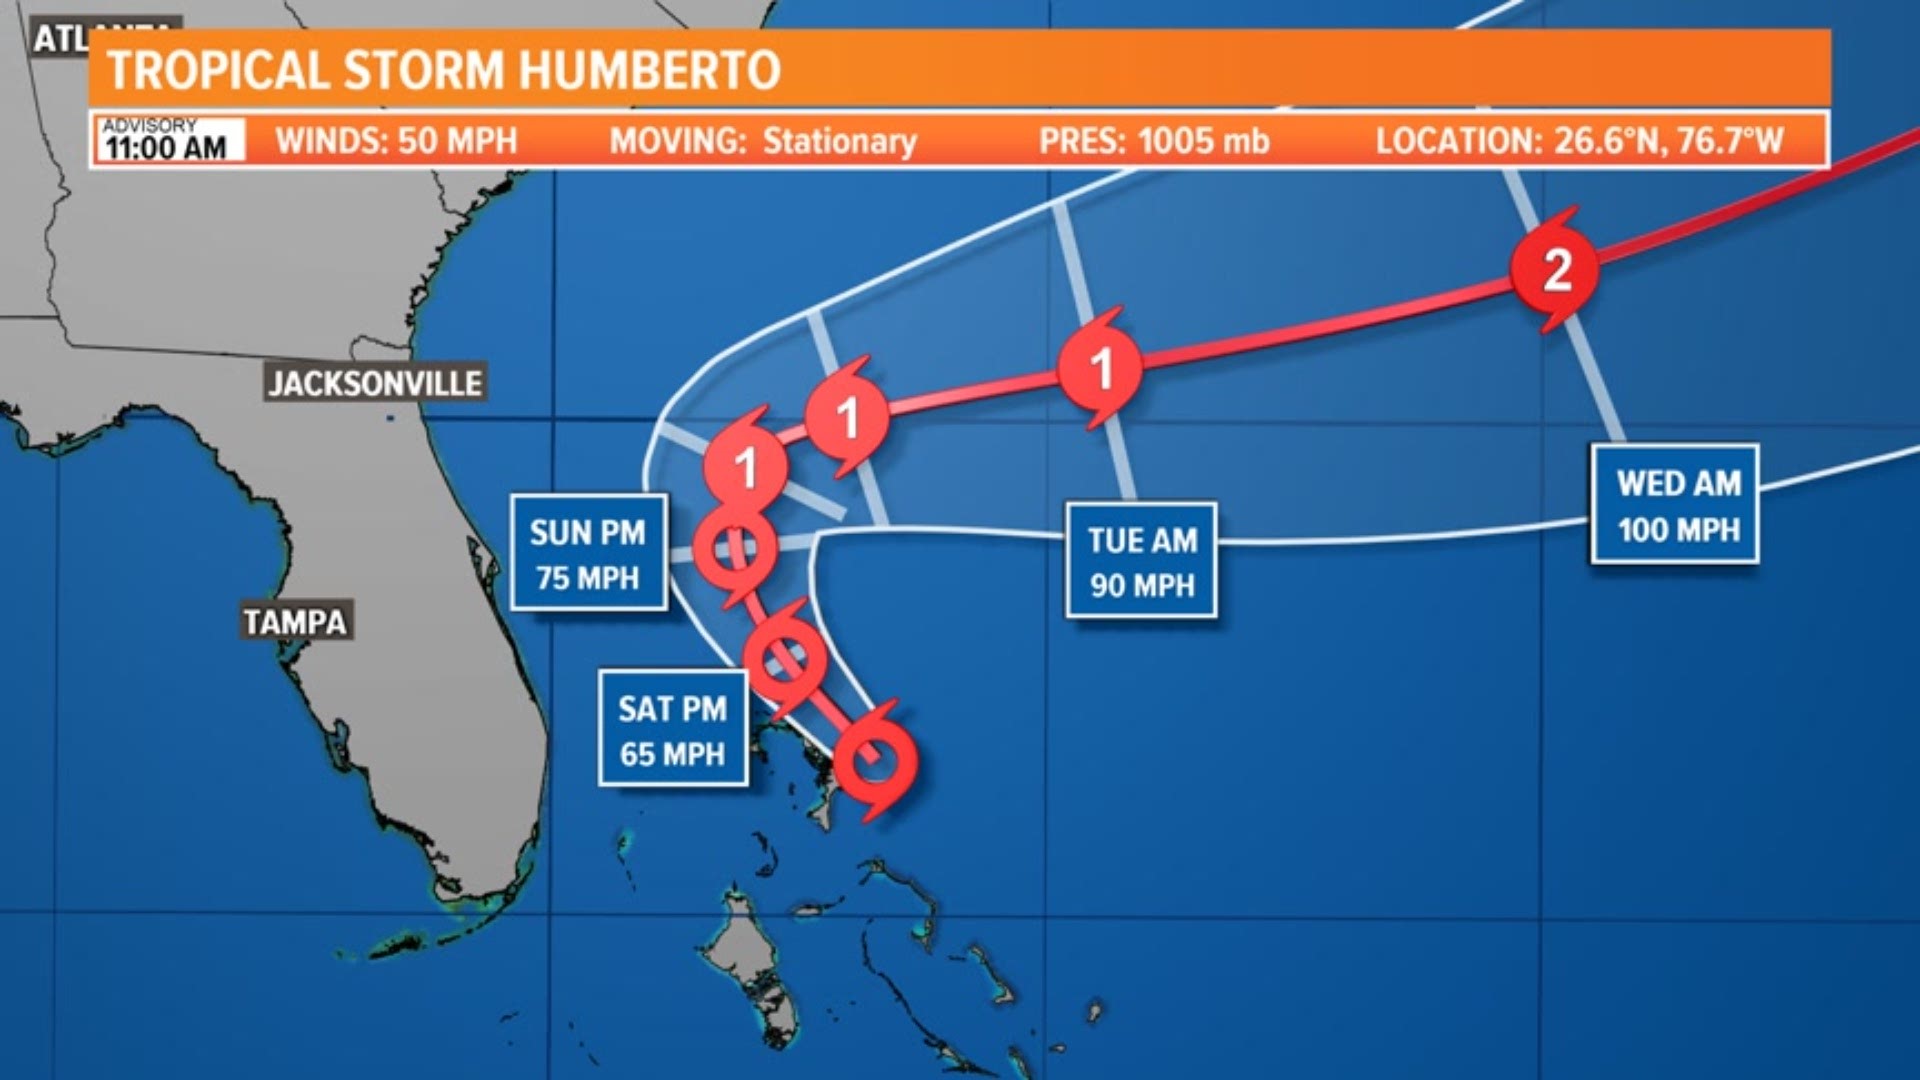 11 a.m. update on Humberto and its impacts across the First Coast from Meteorologist Lauren Rautenkranz.